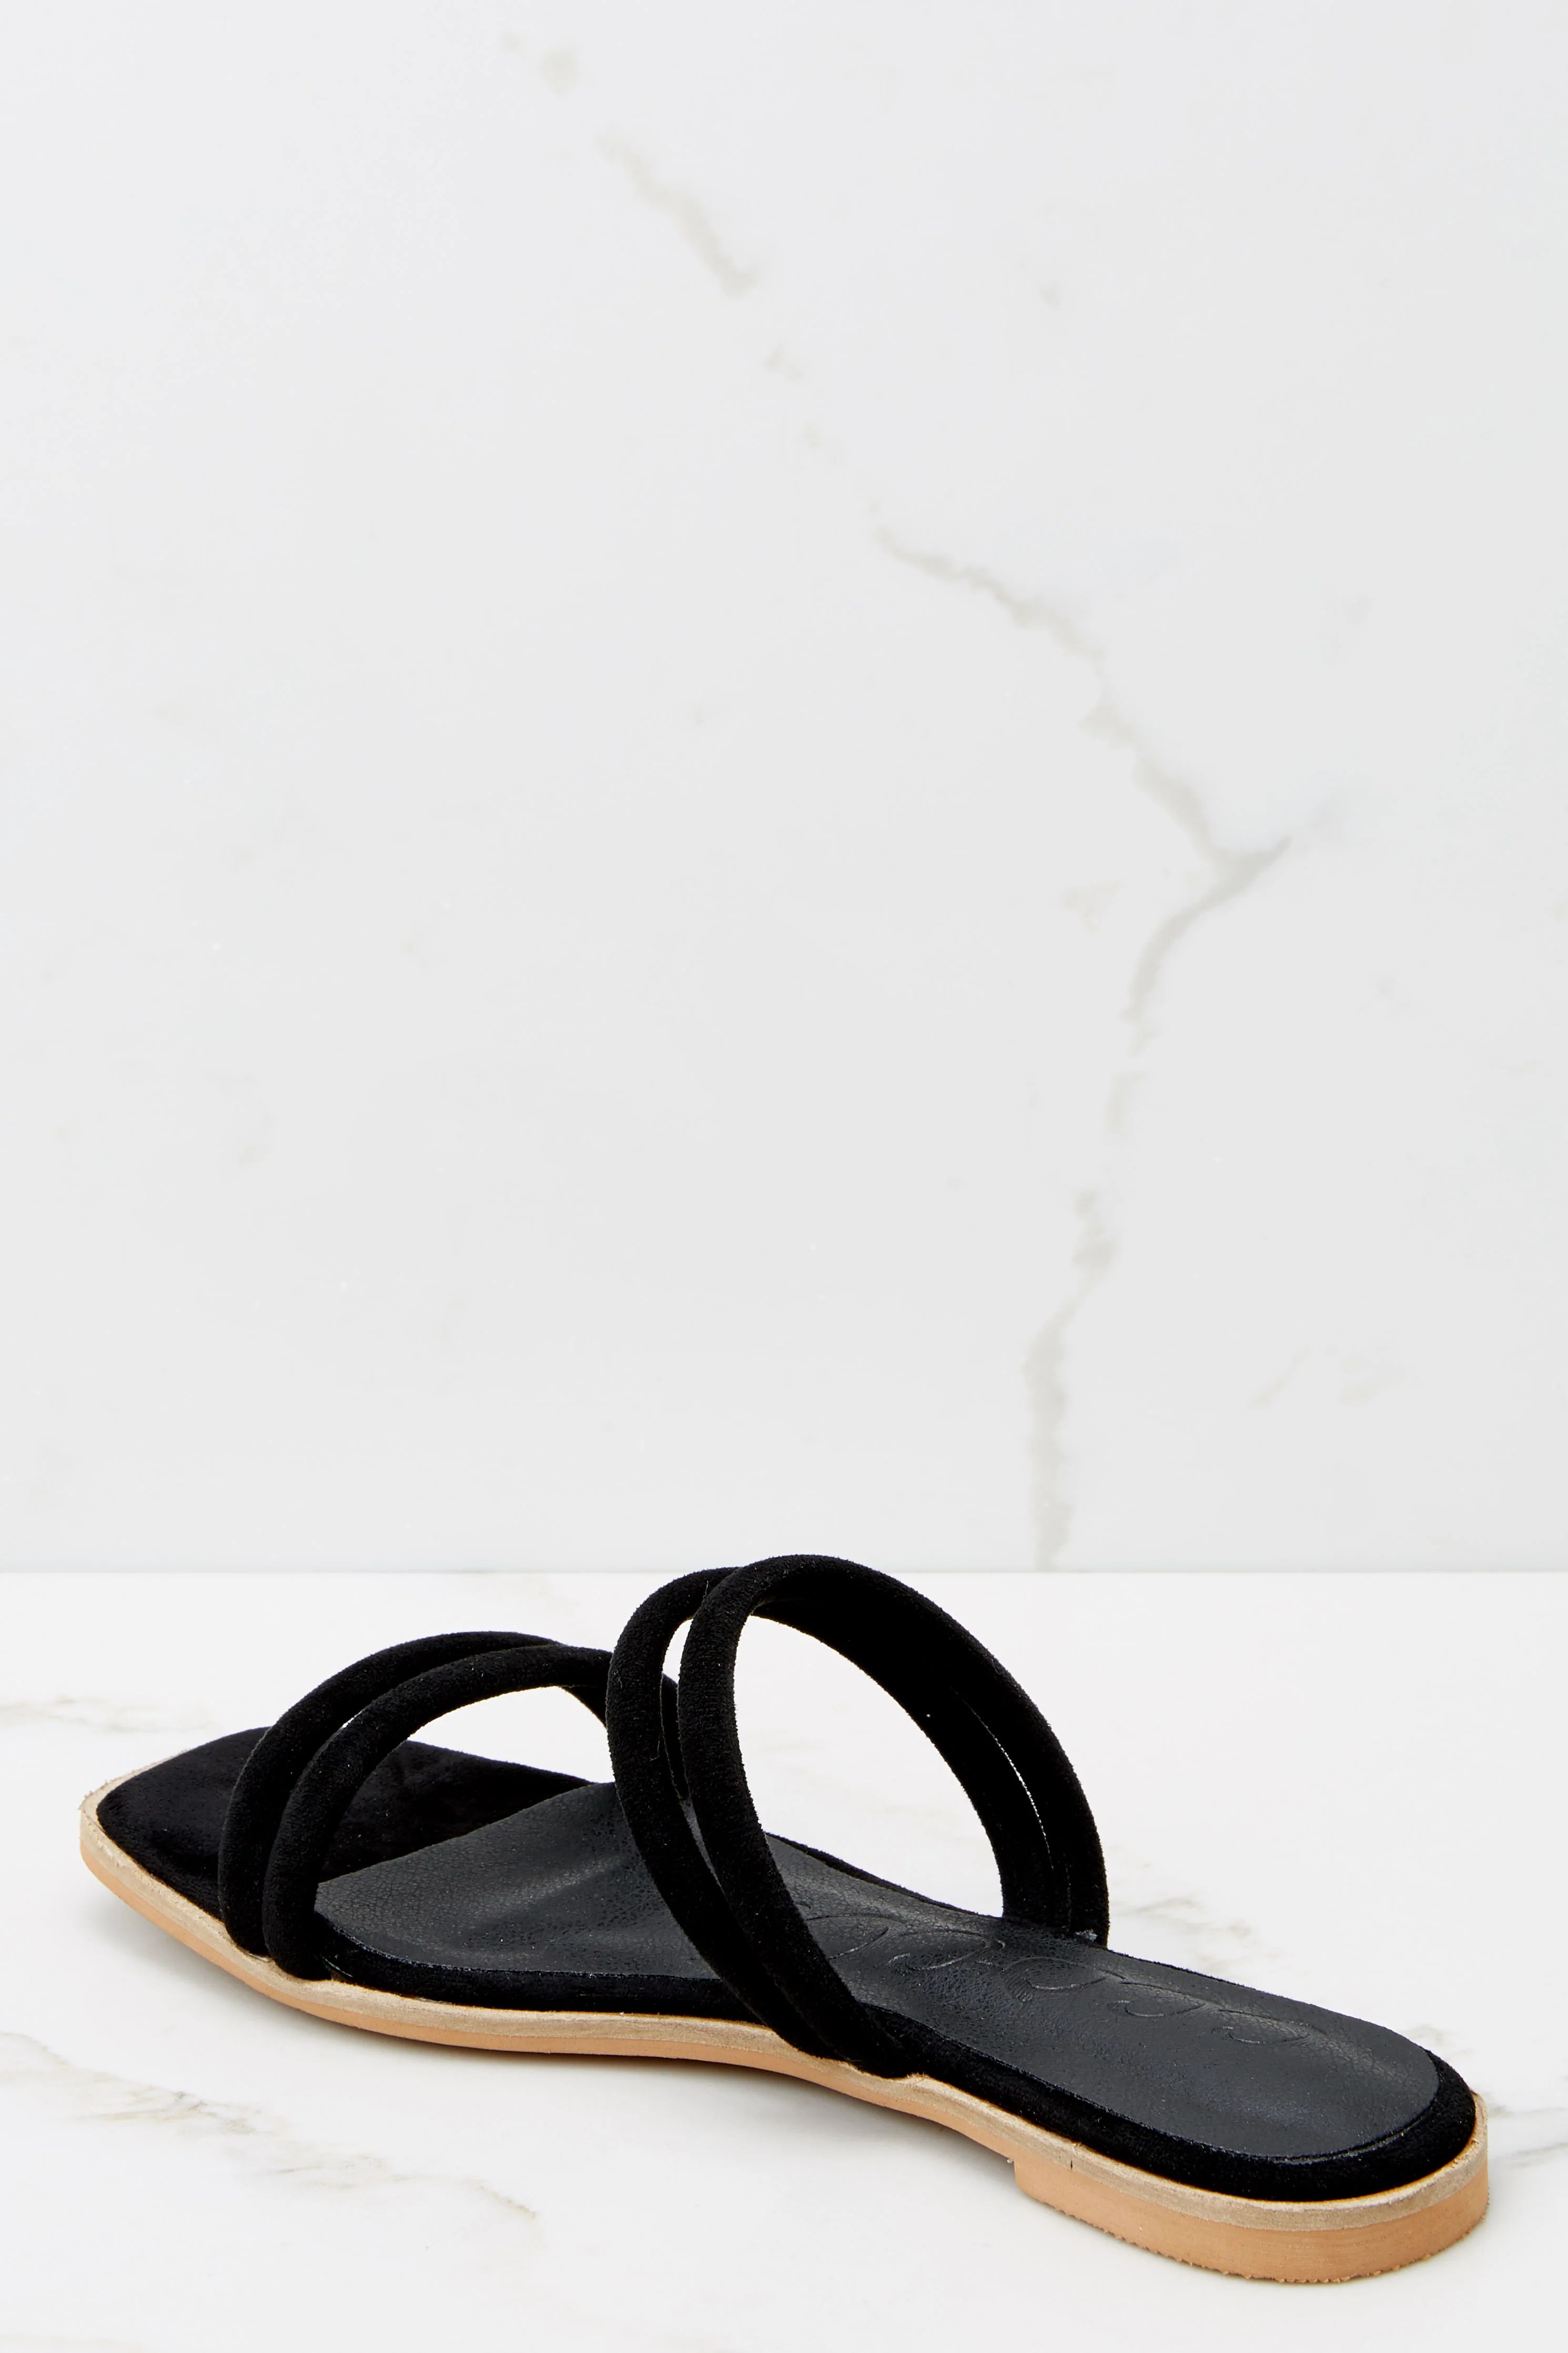 Searching For Sunshine Black Sandals | Red Dress 